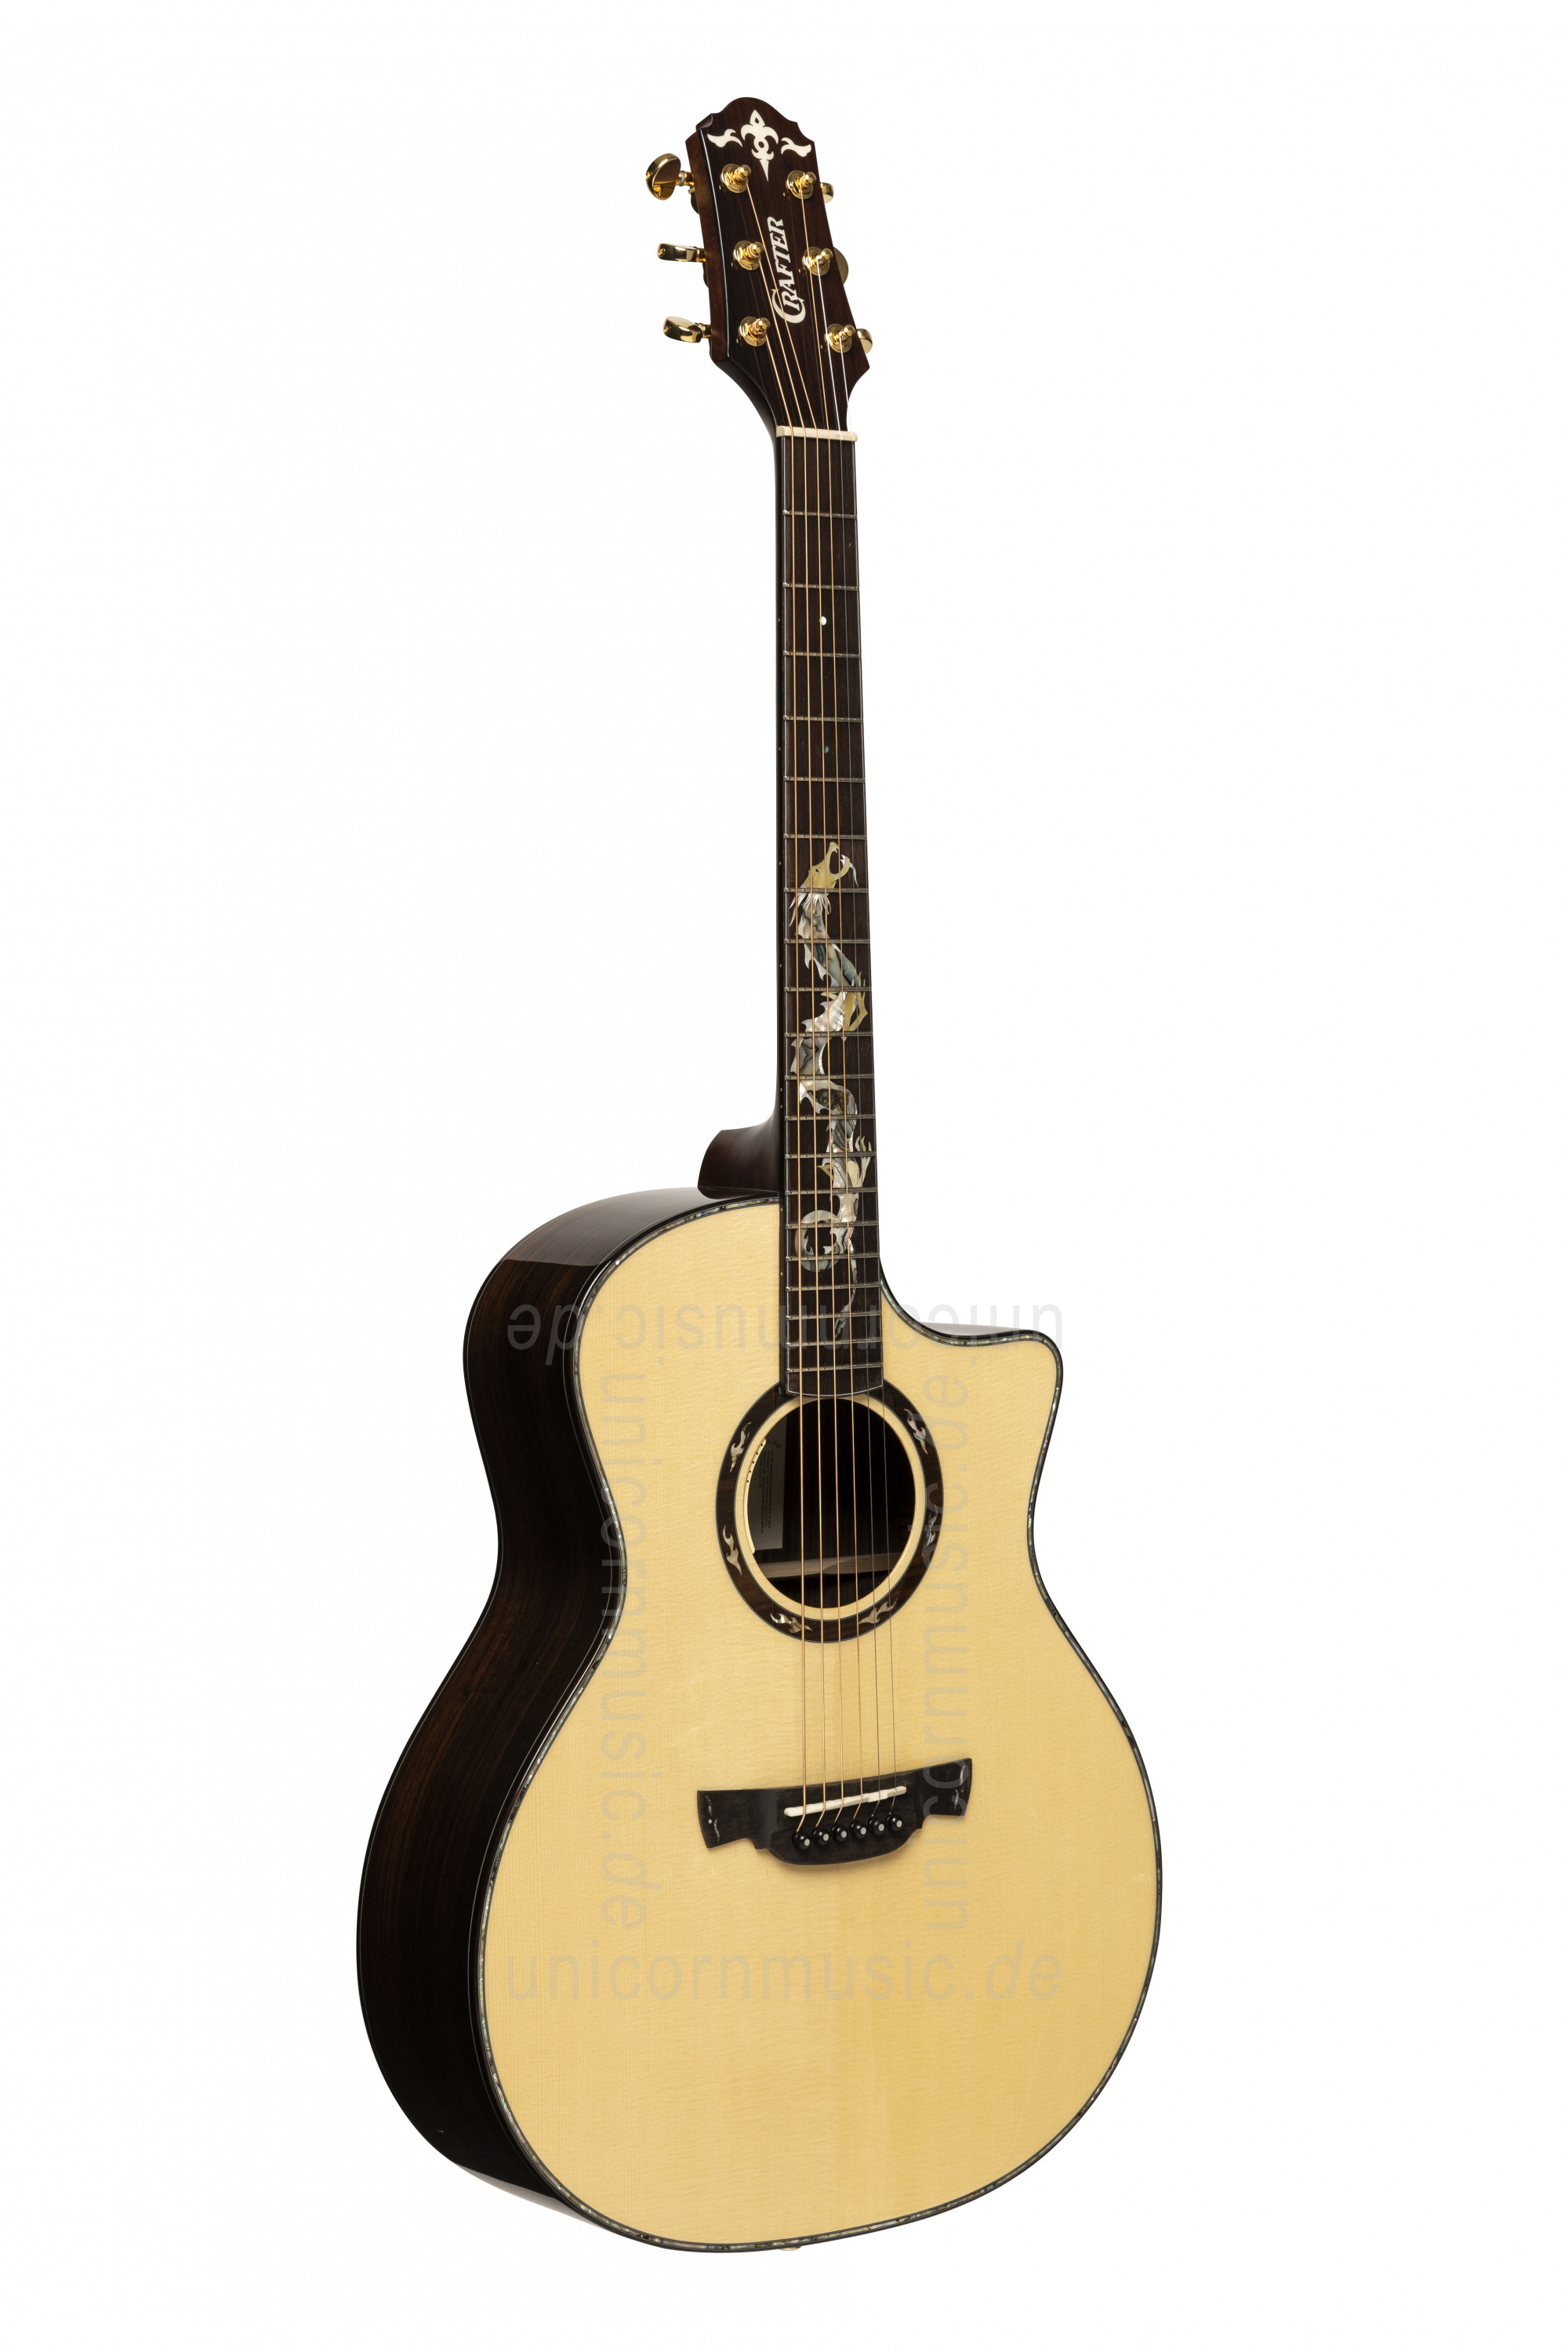 to article description / price Acoustic Guitar - CRAFTER G-1000ce - Dragon - Grand Auditorium - solid spruce top